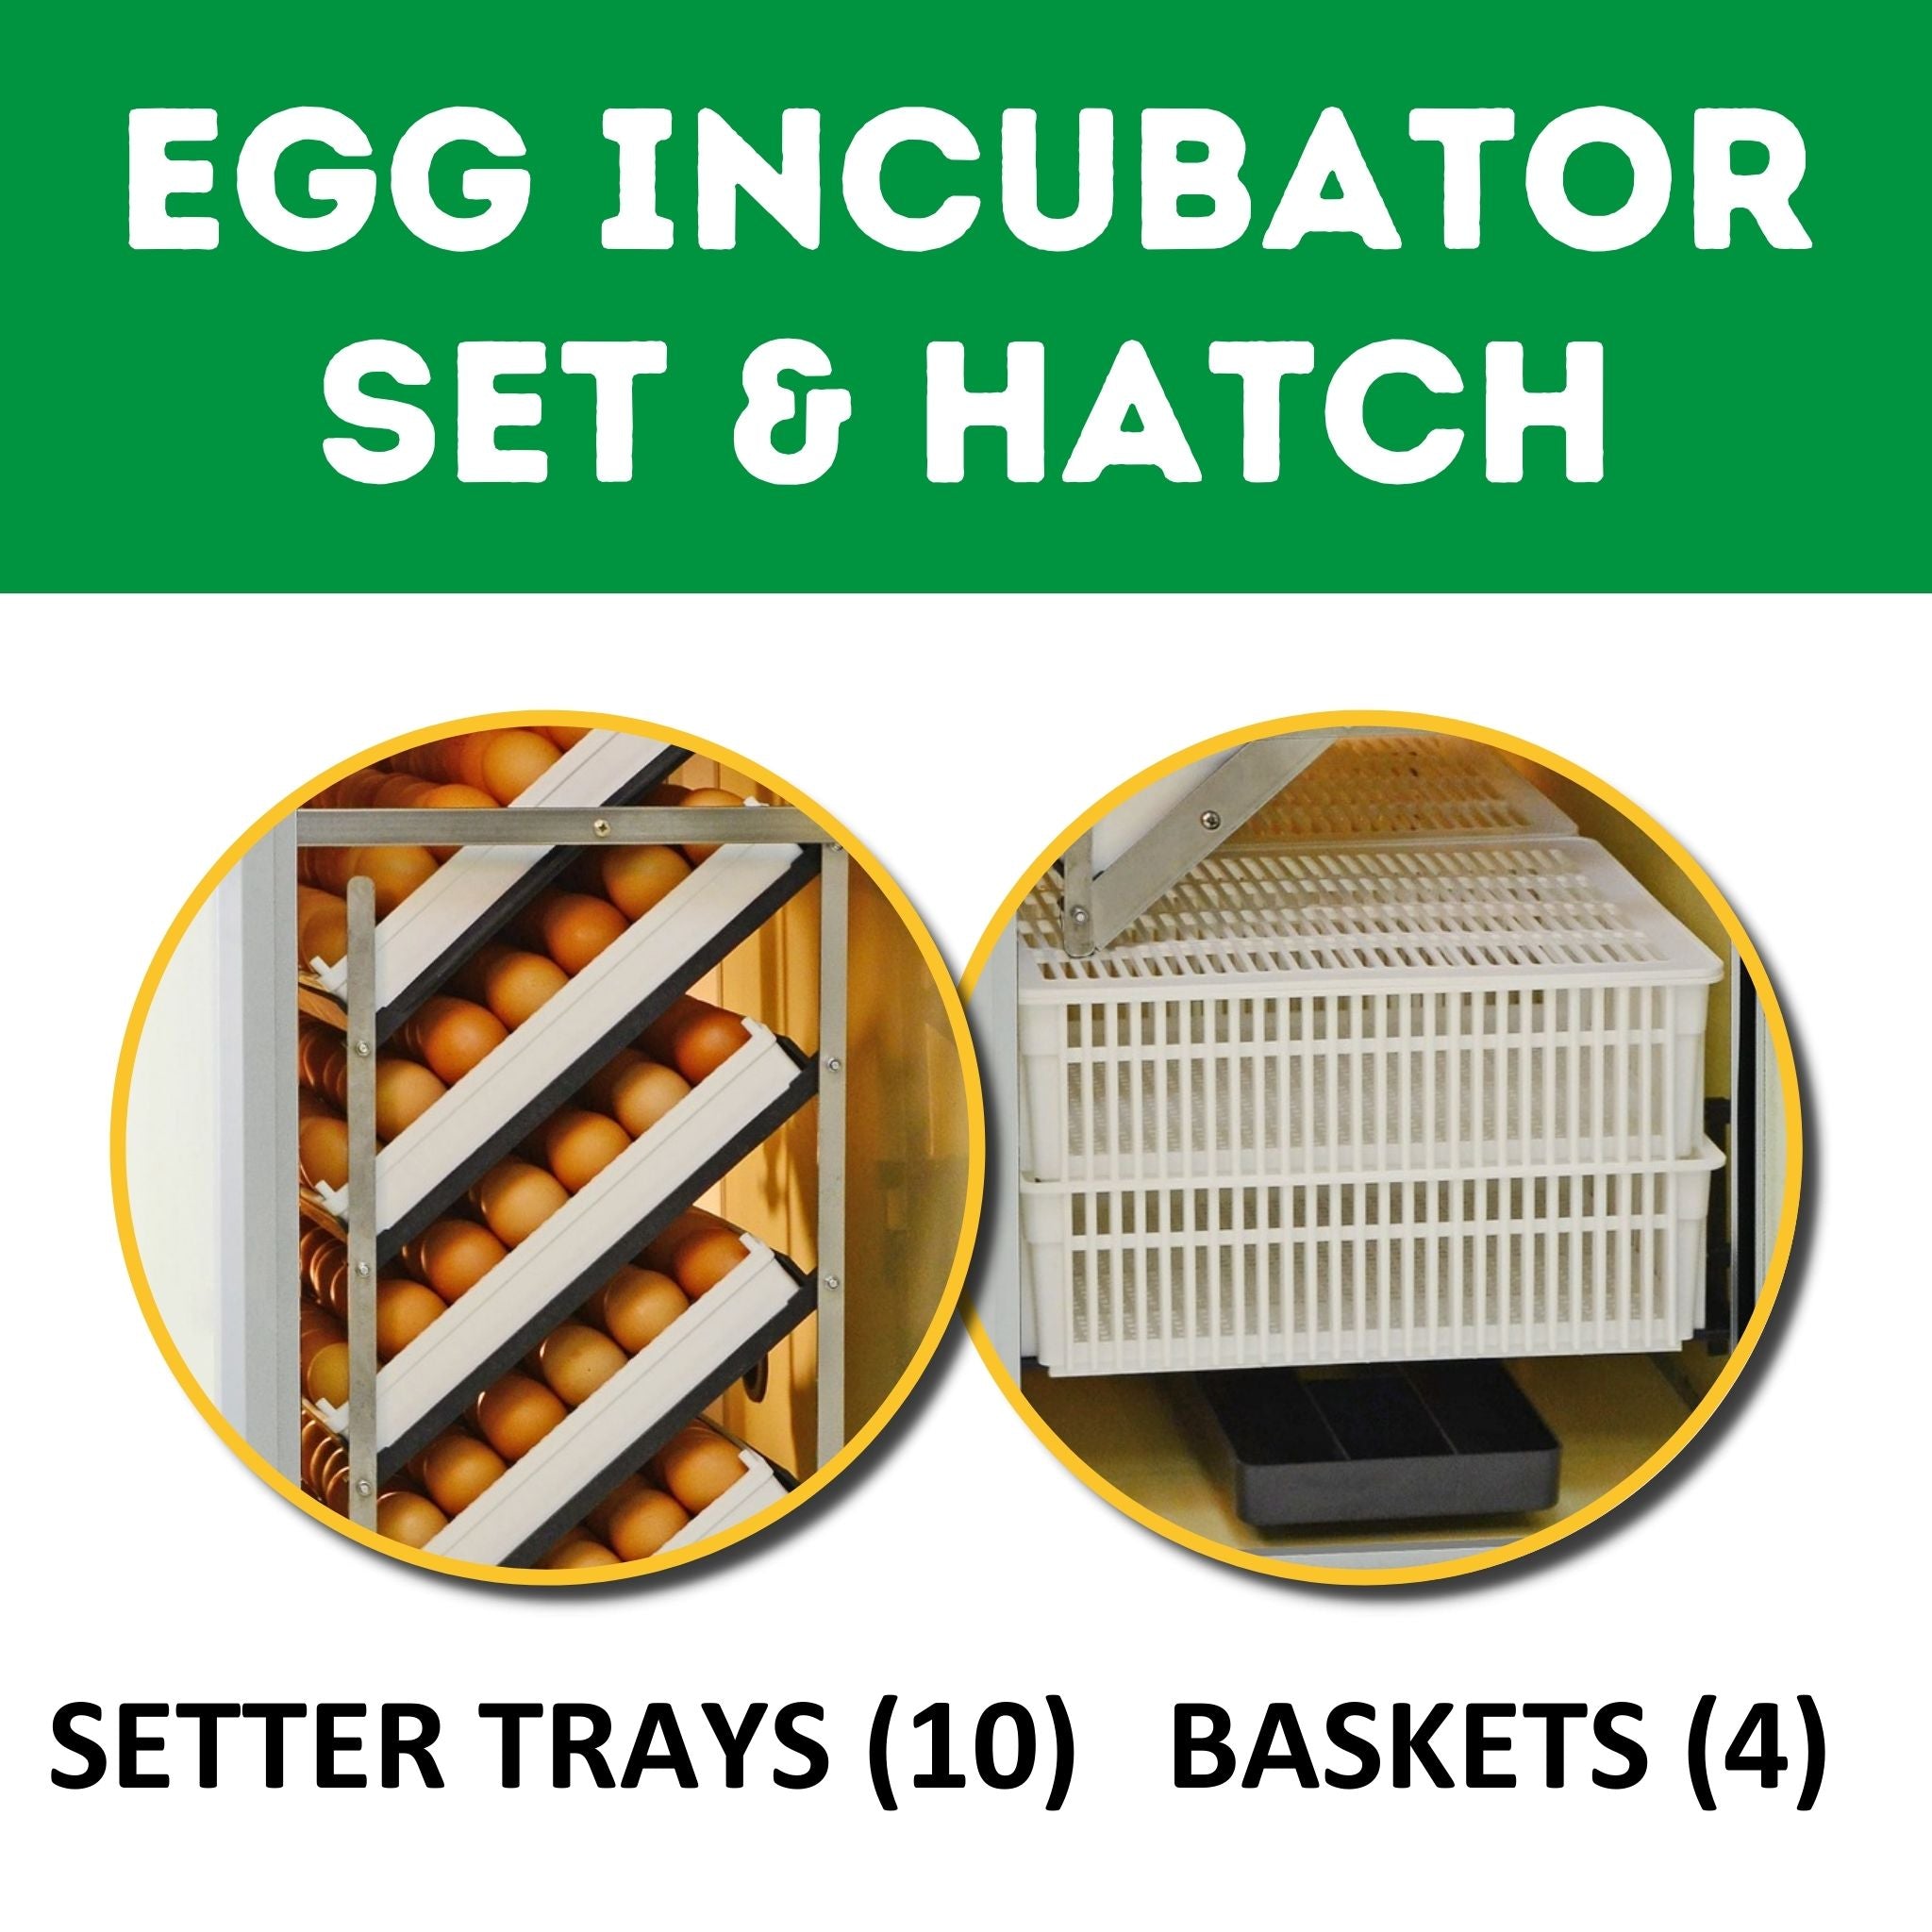 Hatching Time Cimuka. Image shows that incubator is setter and hatcher combo. Includes 10 setter trays and 4 hatching baskets, both seen in image.